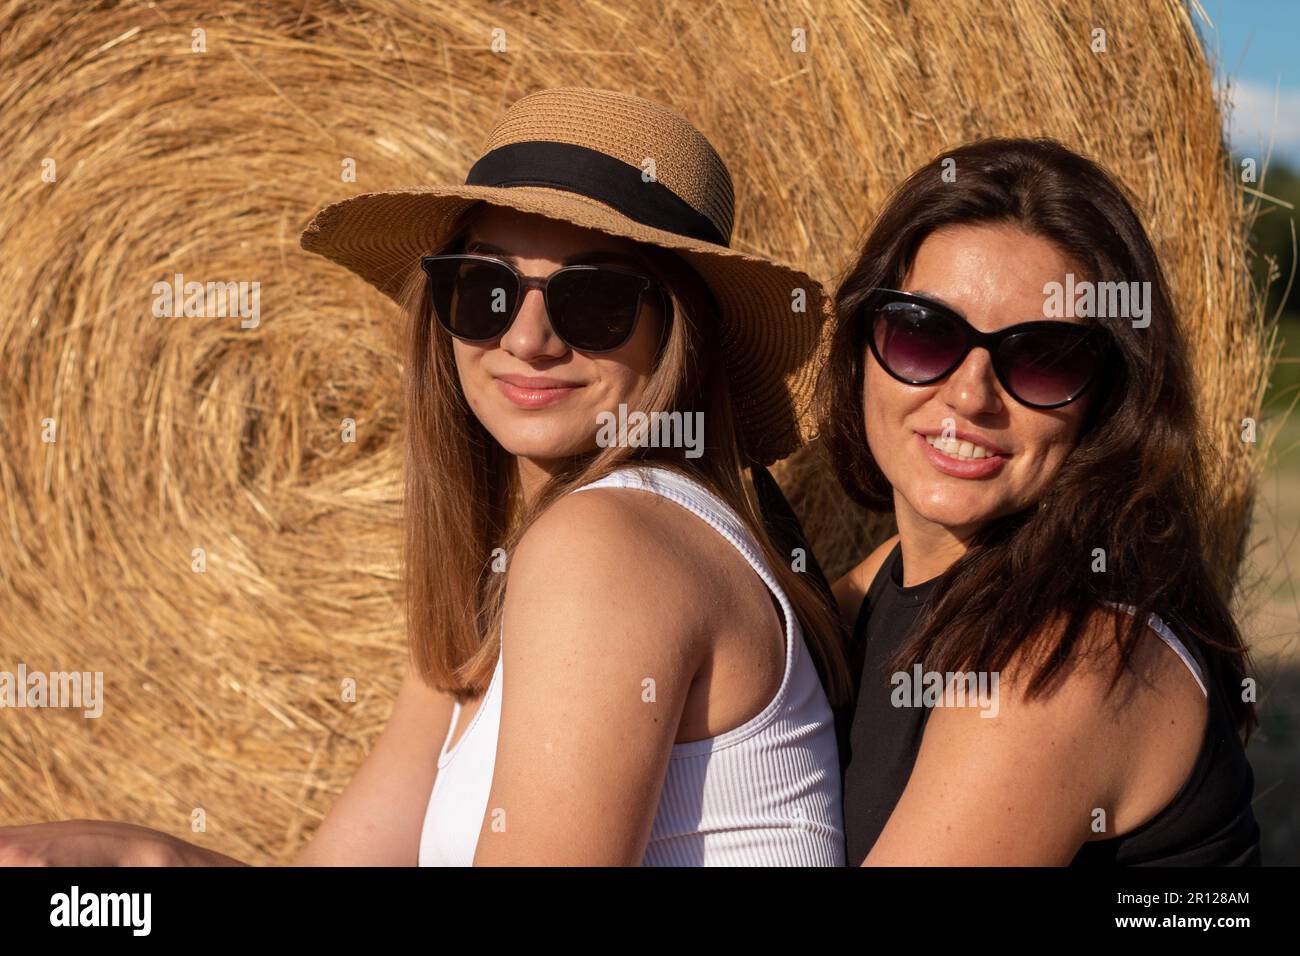 Two young women smiling and enjoying the day wearing stylish wide-brimmed hats and sunglasses while sitting side by side Stock Photo